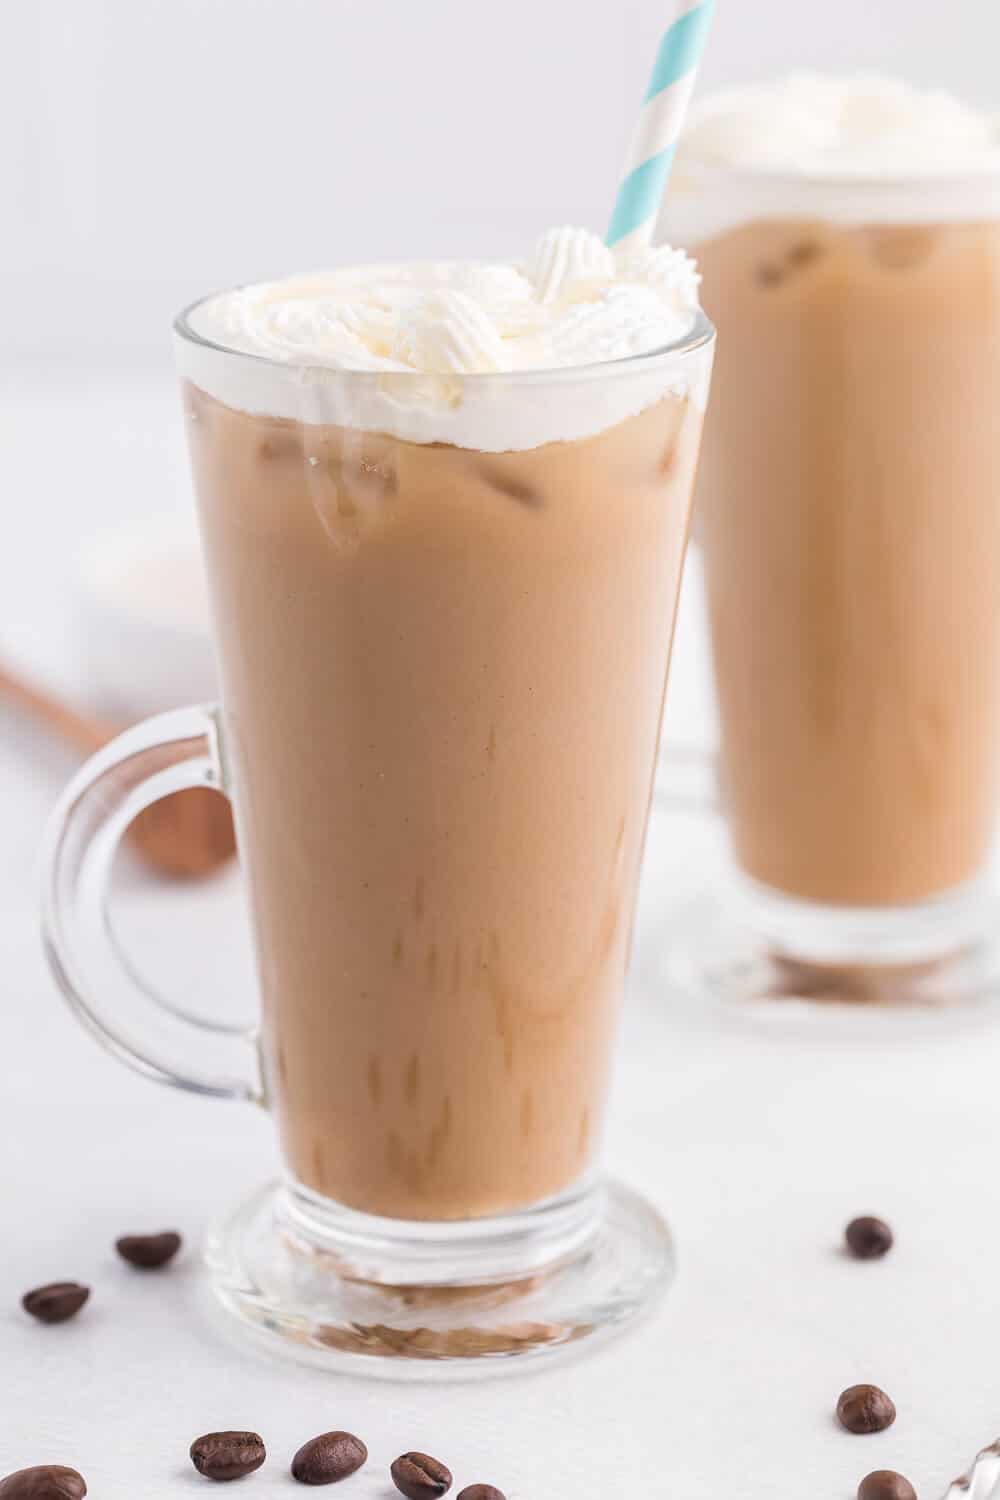 Iced Honey Almond Milk Latte - Get your coffee fix with a creamy, sweet and healthy iced latte recipe.